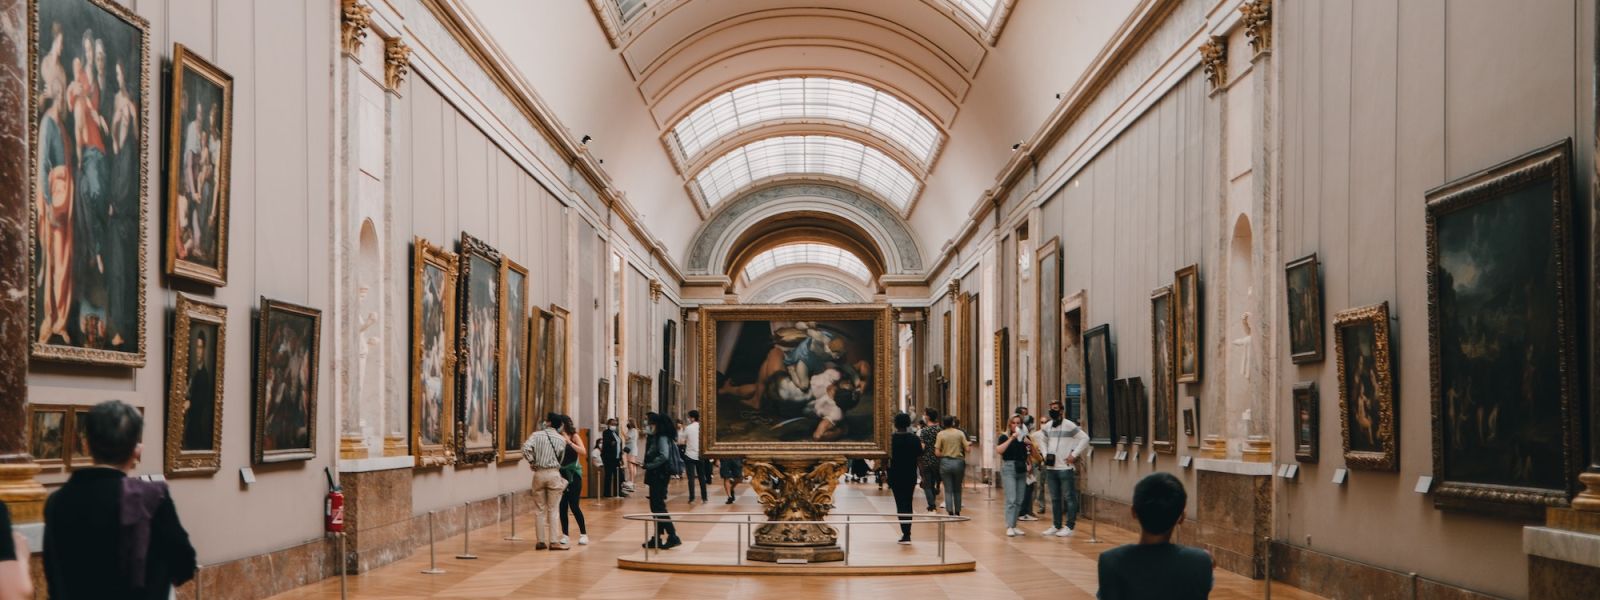 An art gallery with a large curved ceiling